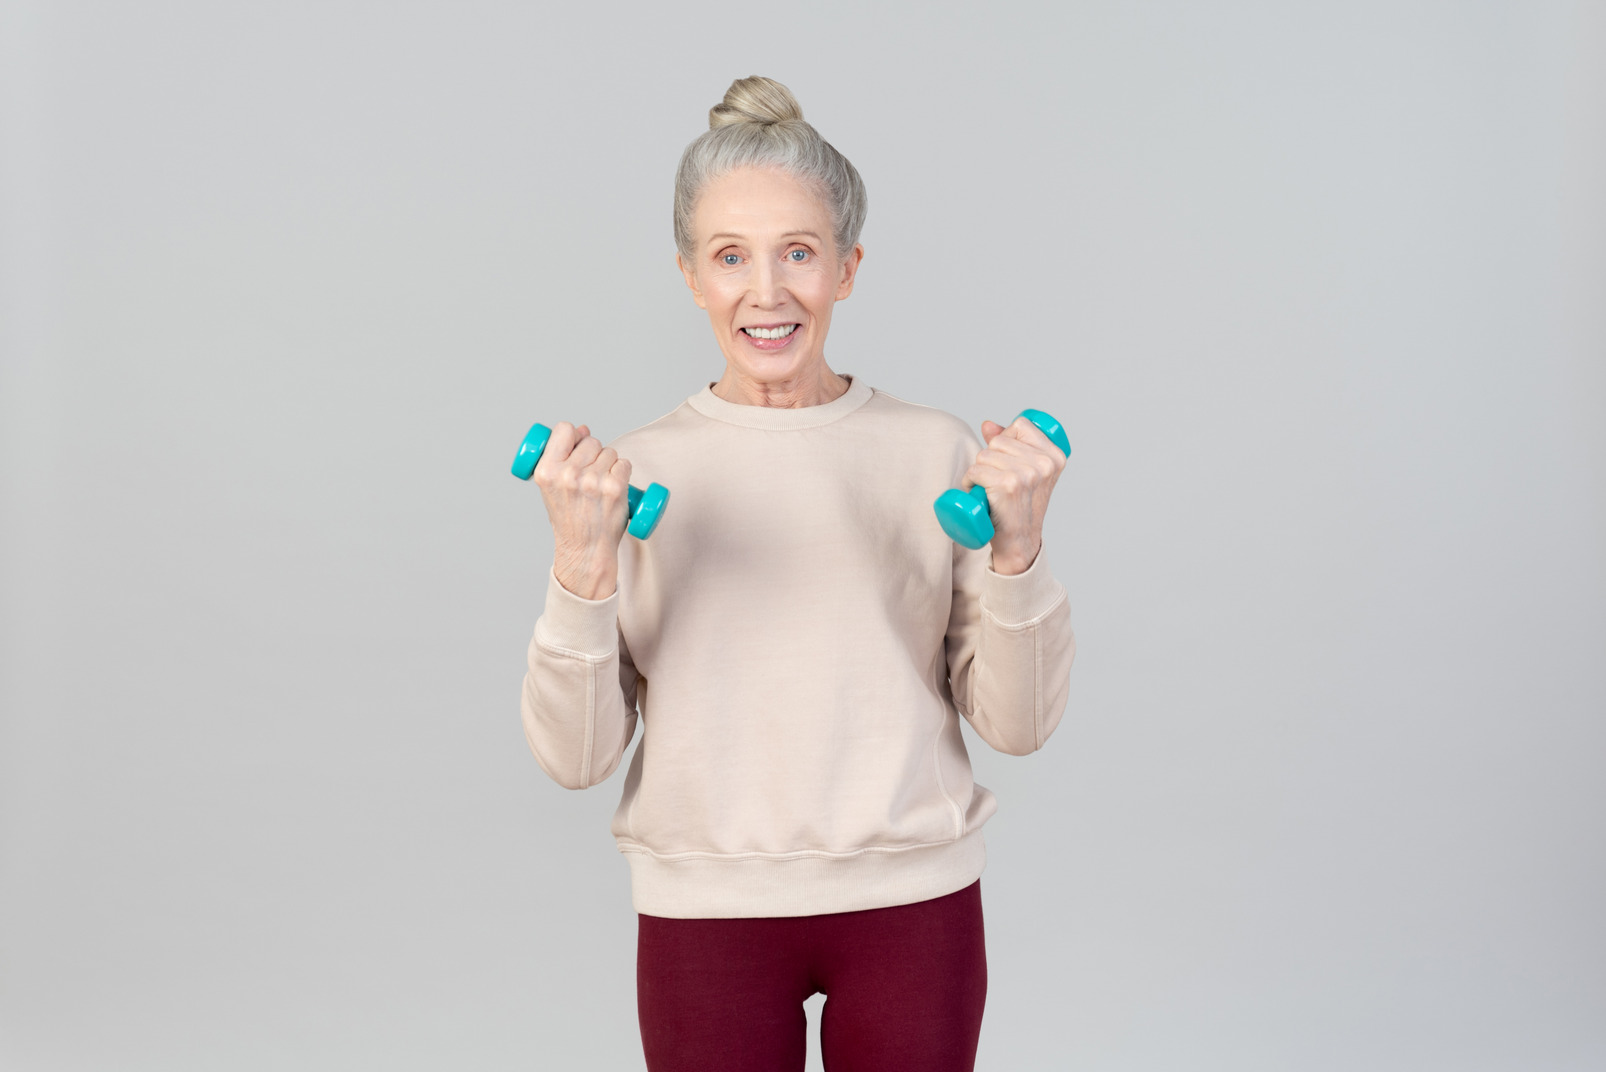 Old woman holding hand weights